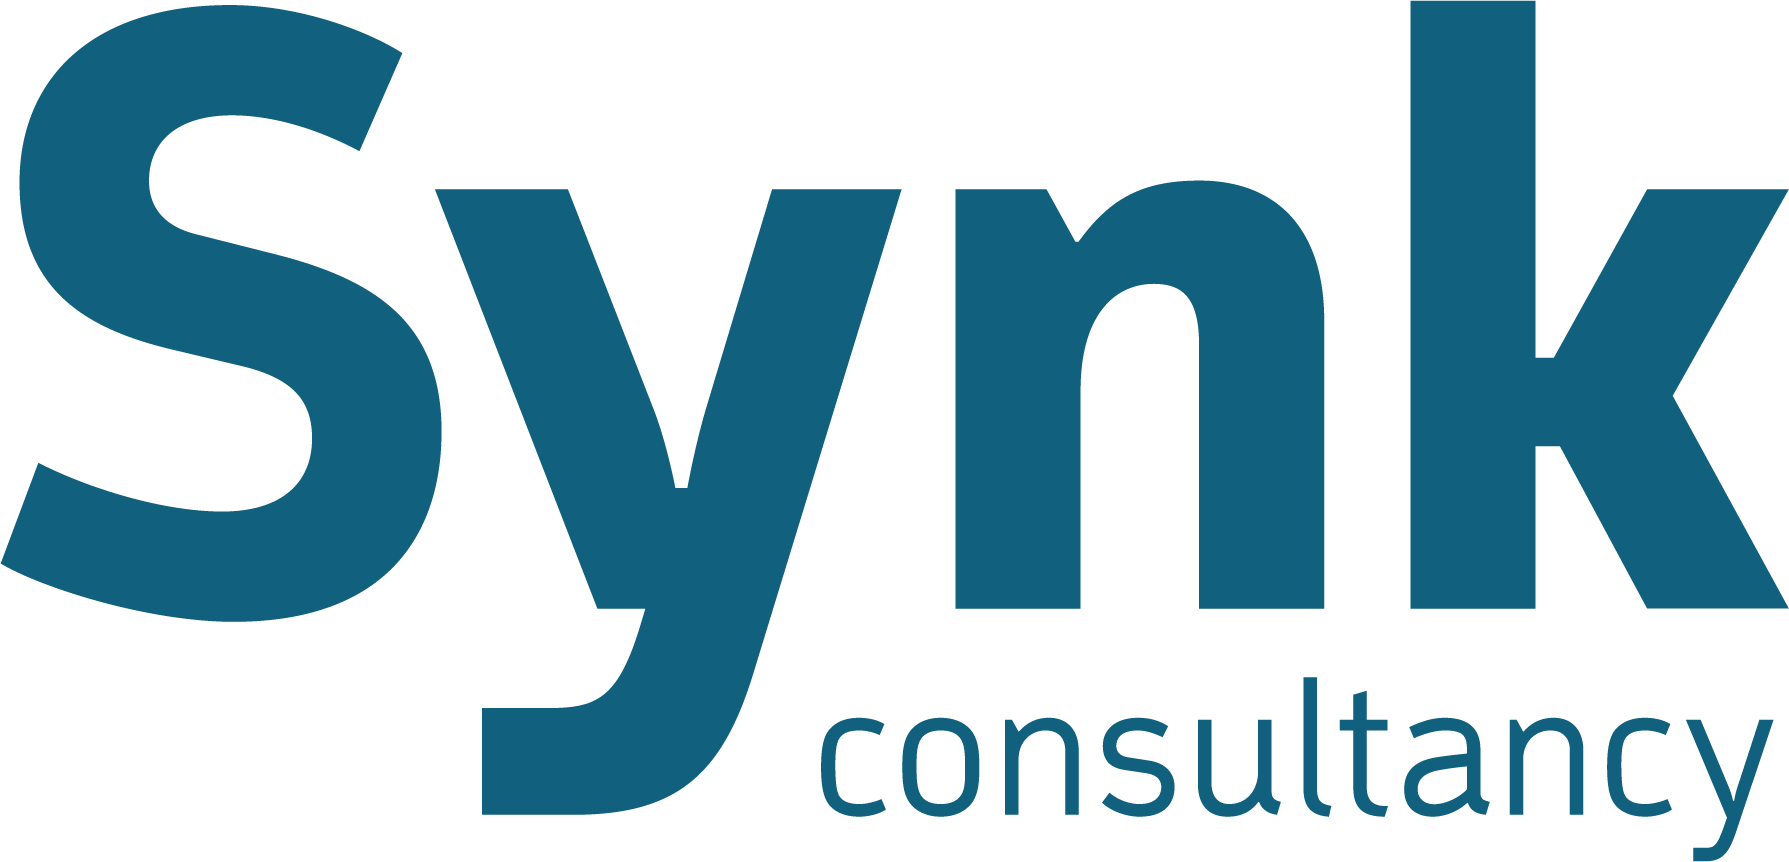 Synk Consultancy